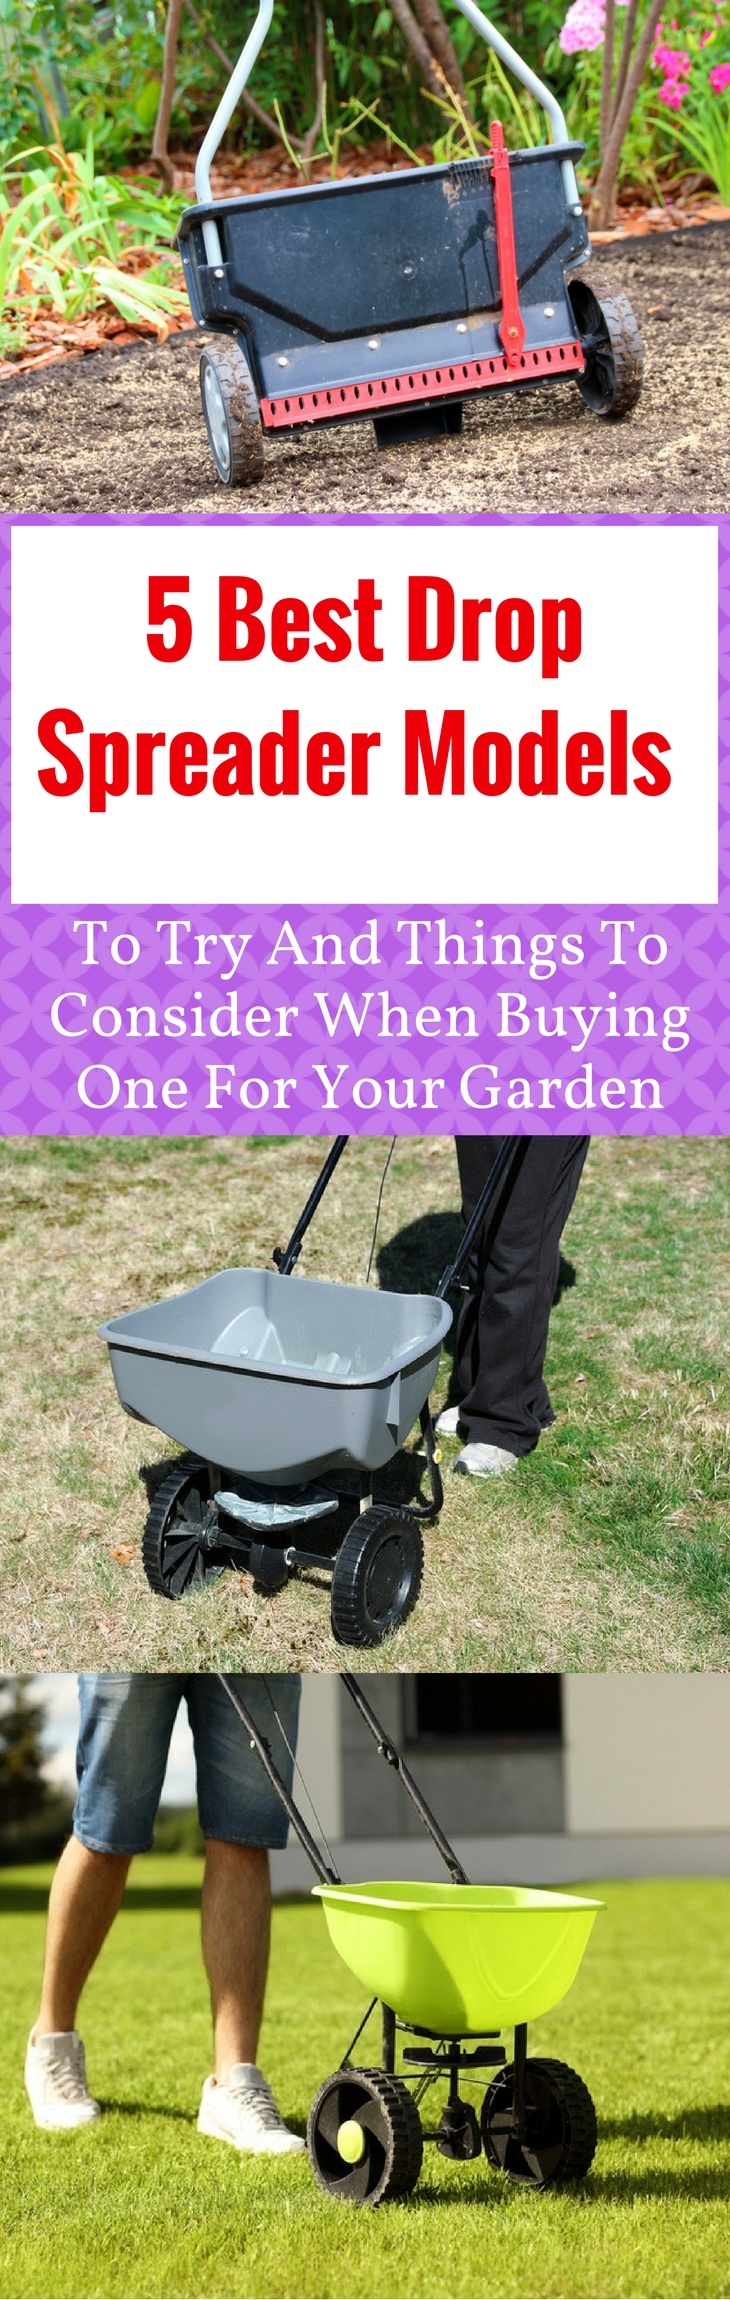 5 Best Drop Spreader Models To Try And Things To Consider When Buying One For Your Garden - pin it